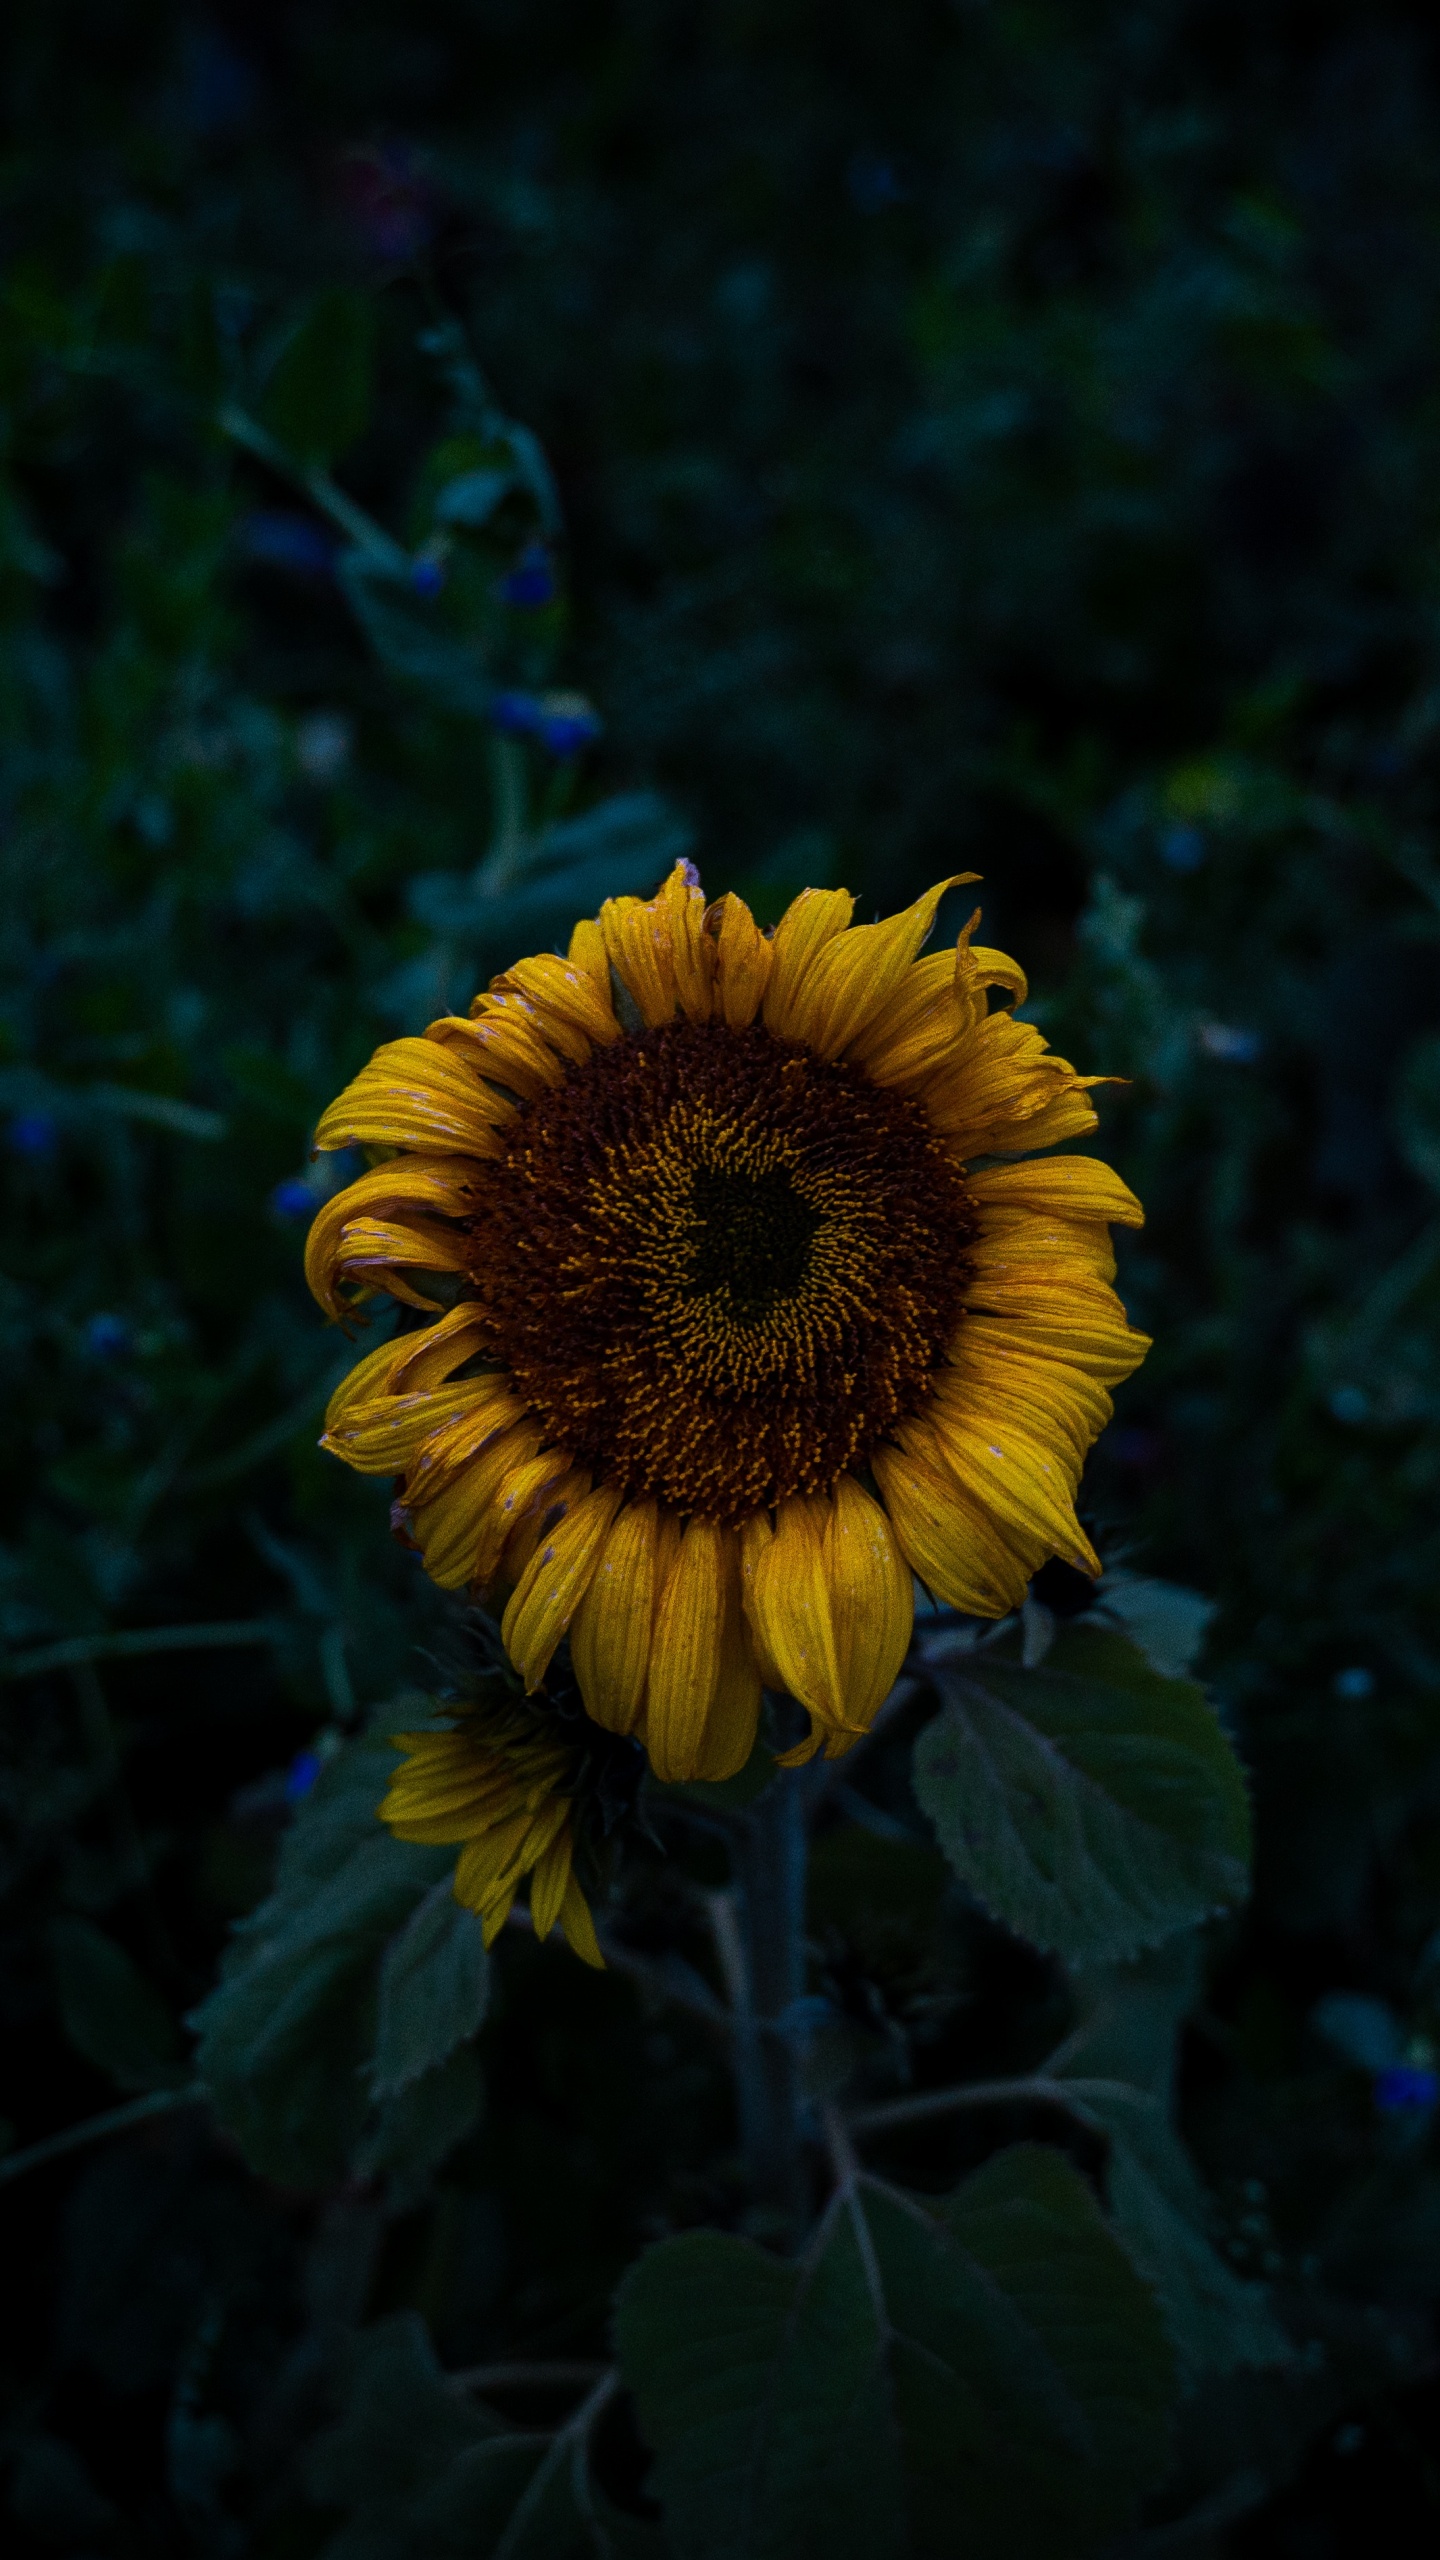 Yellow Sunflower in Bloom During Daytime. Wallpaper in 1440x2560 Resolution